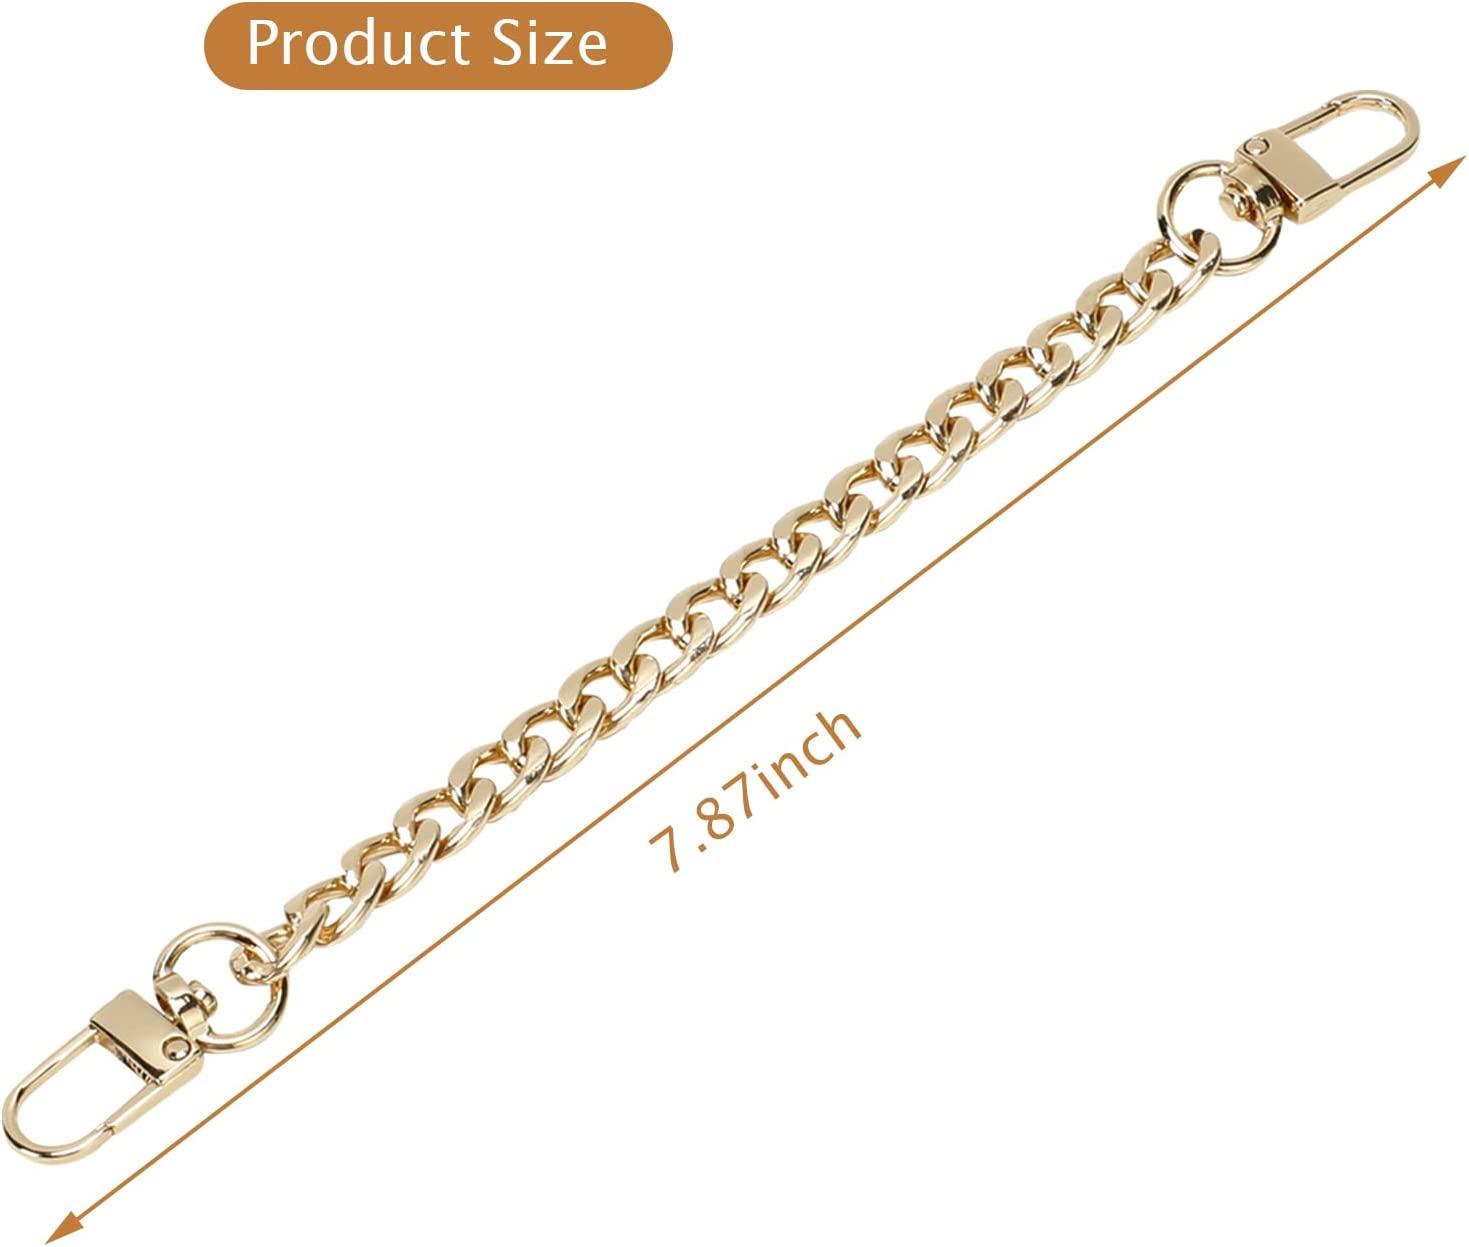  ZLYY 12mm Gold Purse Strap Extender Flat Chain Strap Gold  Handbag Chains Accessories Decoration For For Handbag Wallet Clutch(2pcs) :  Clothing, Shoes & Jewelry